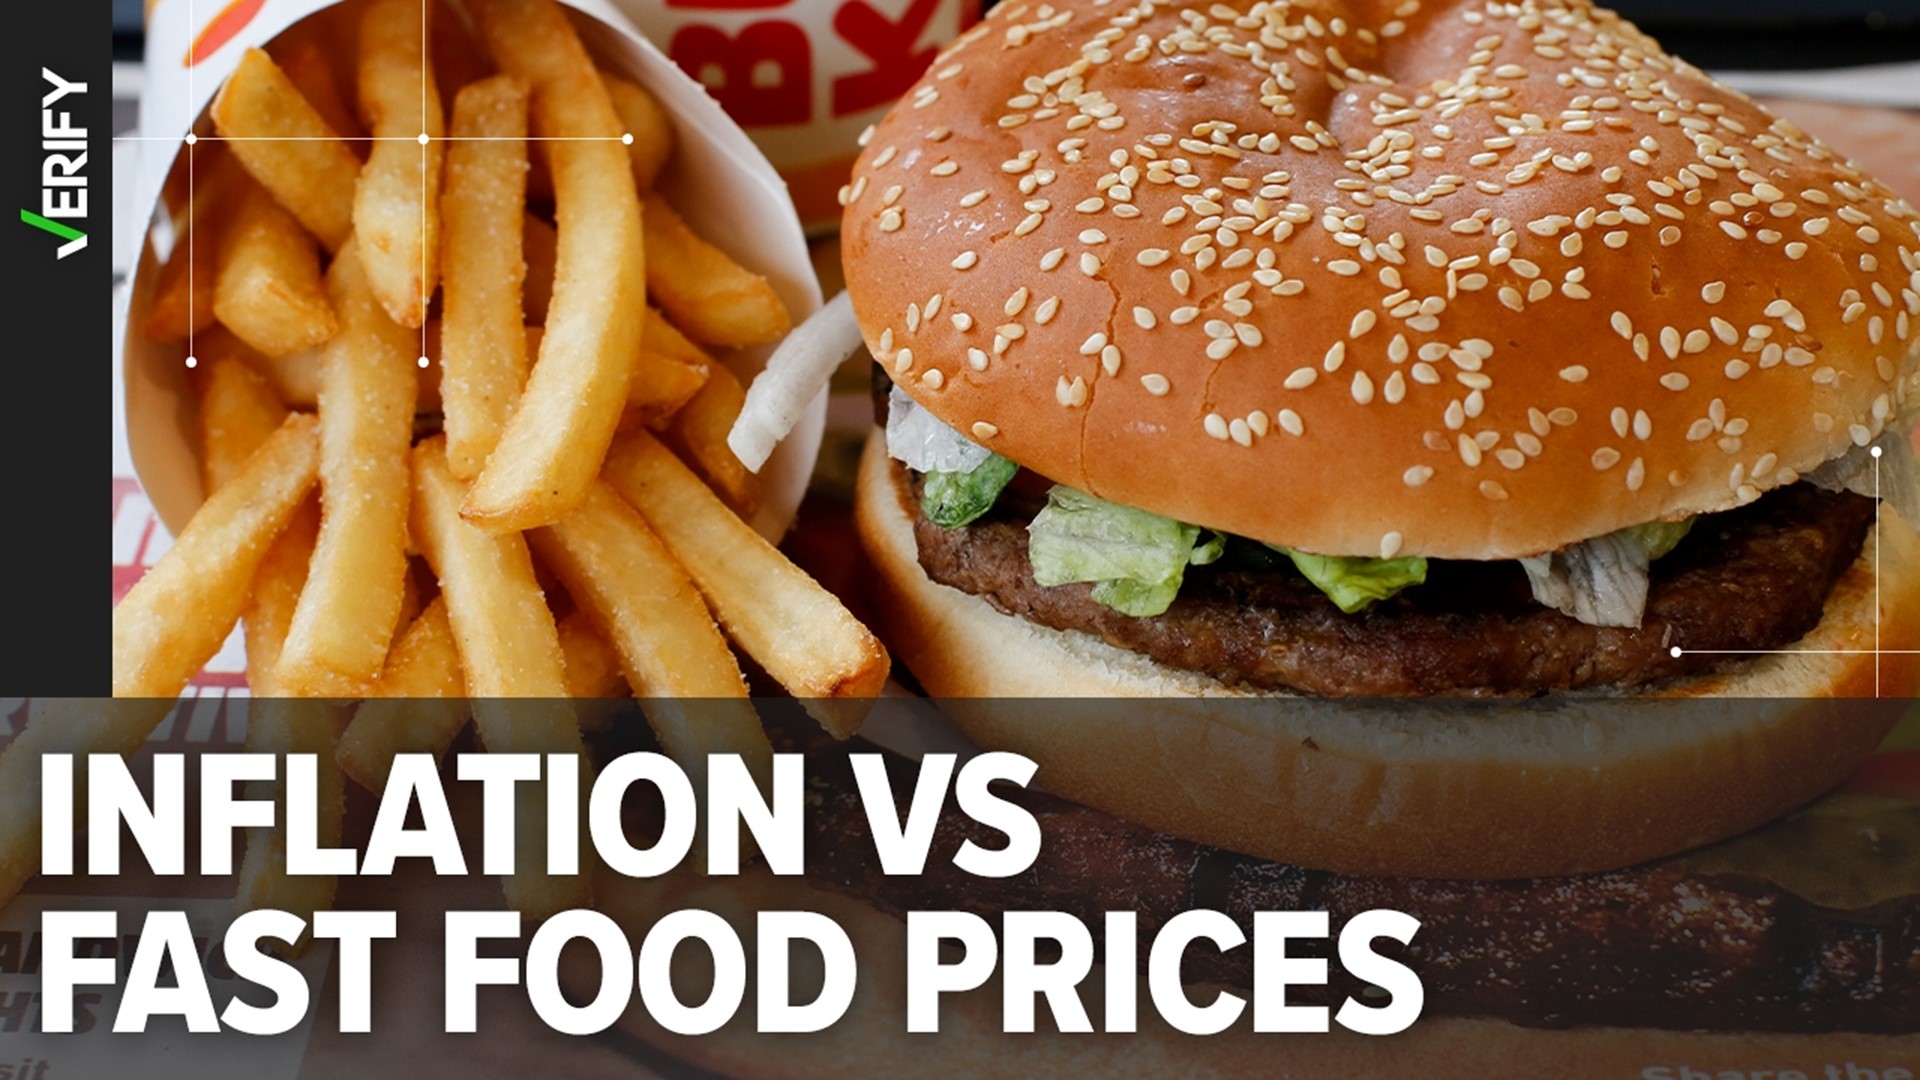 Prices at fast food restaurants such as McDonald’s, Taco Bell and Wendy’s have been rising faster than inflation since at least 2009.